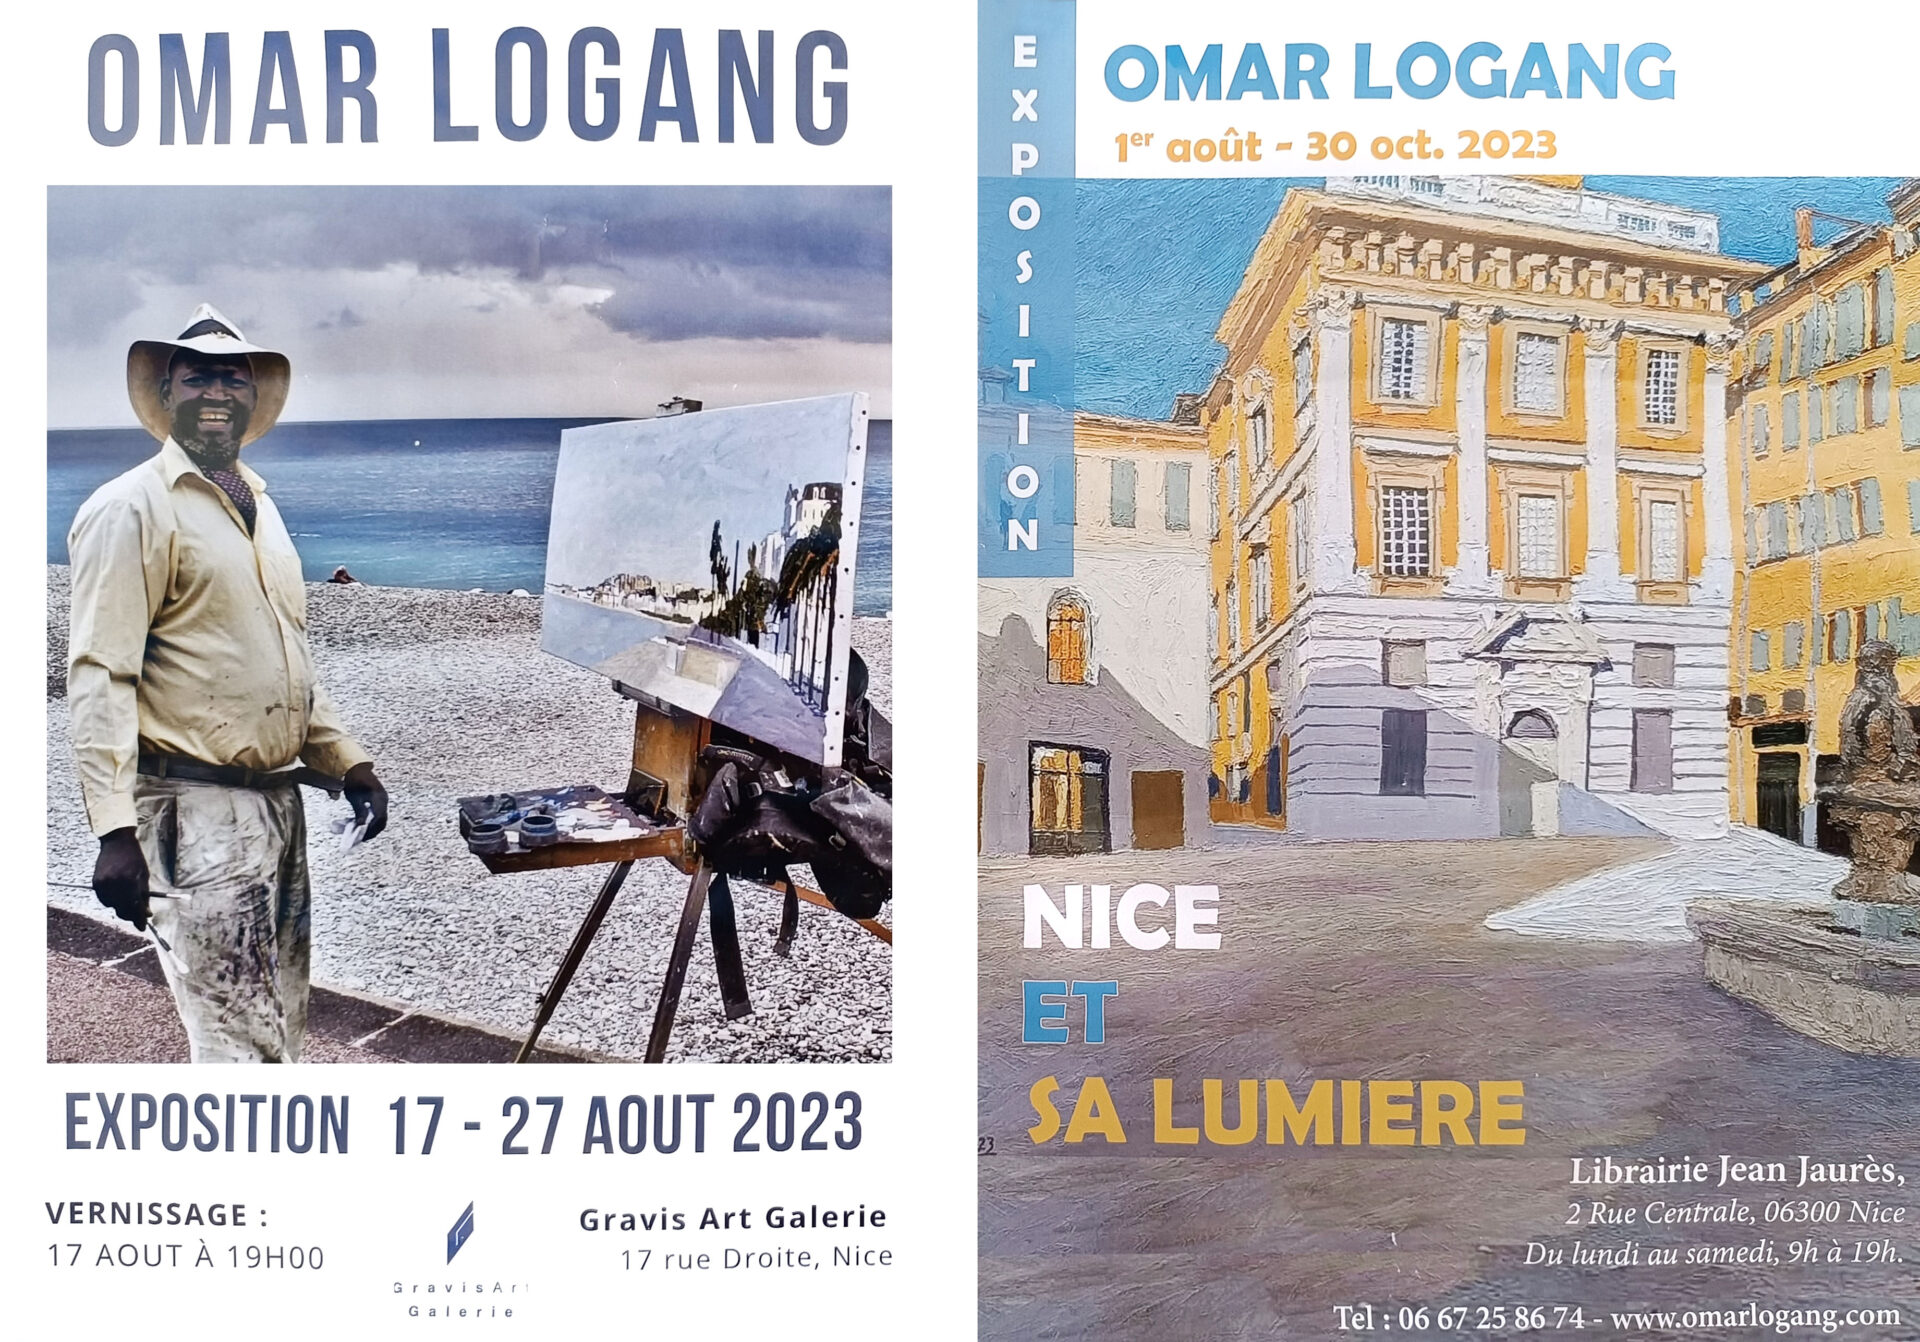 Exposition Omar Logang